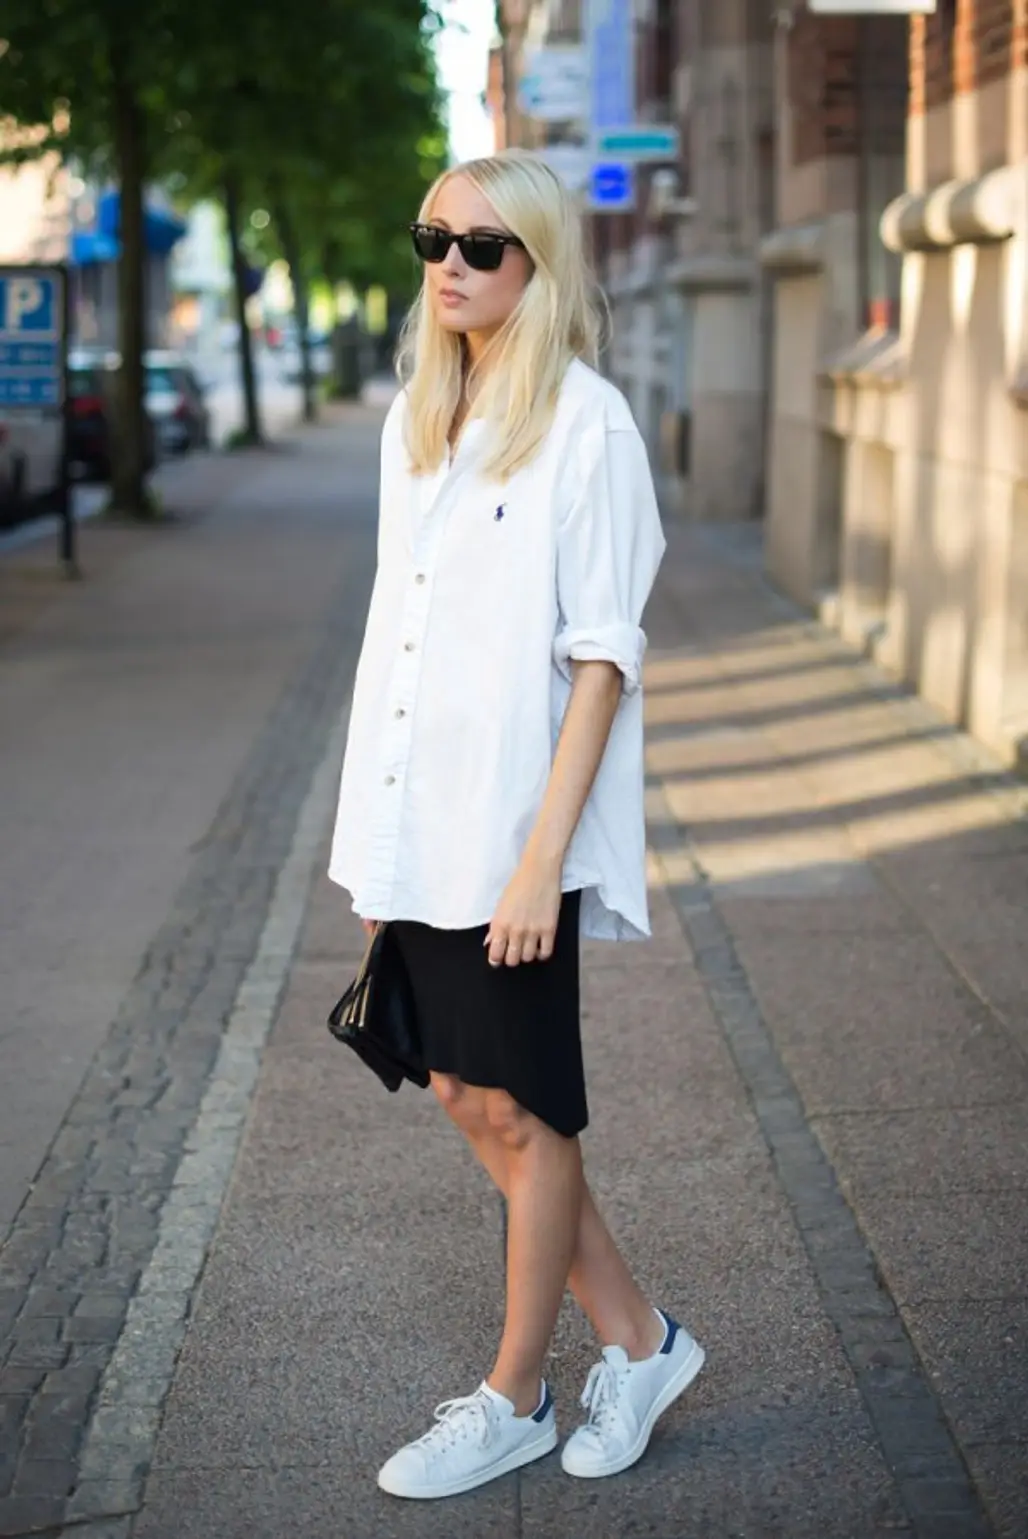 Ready for the Weekend: Oversized Shirt and Black Skirt